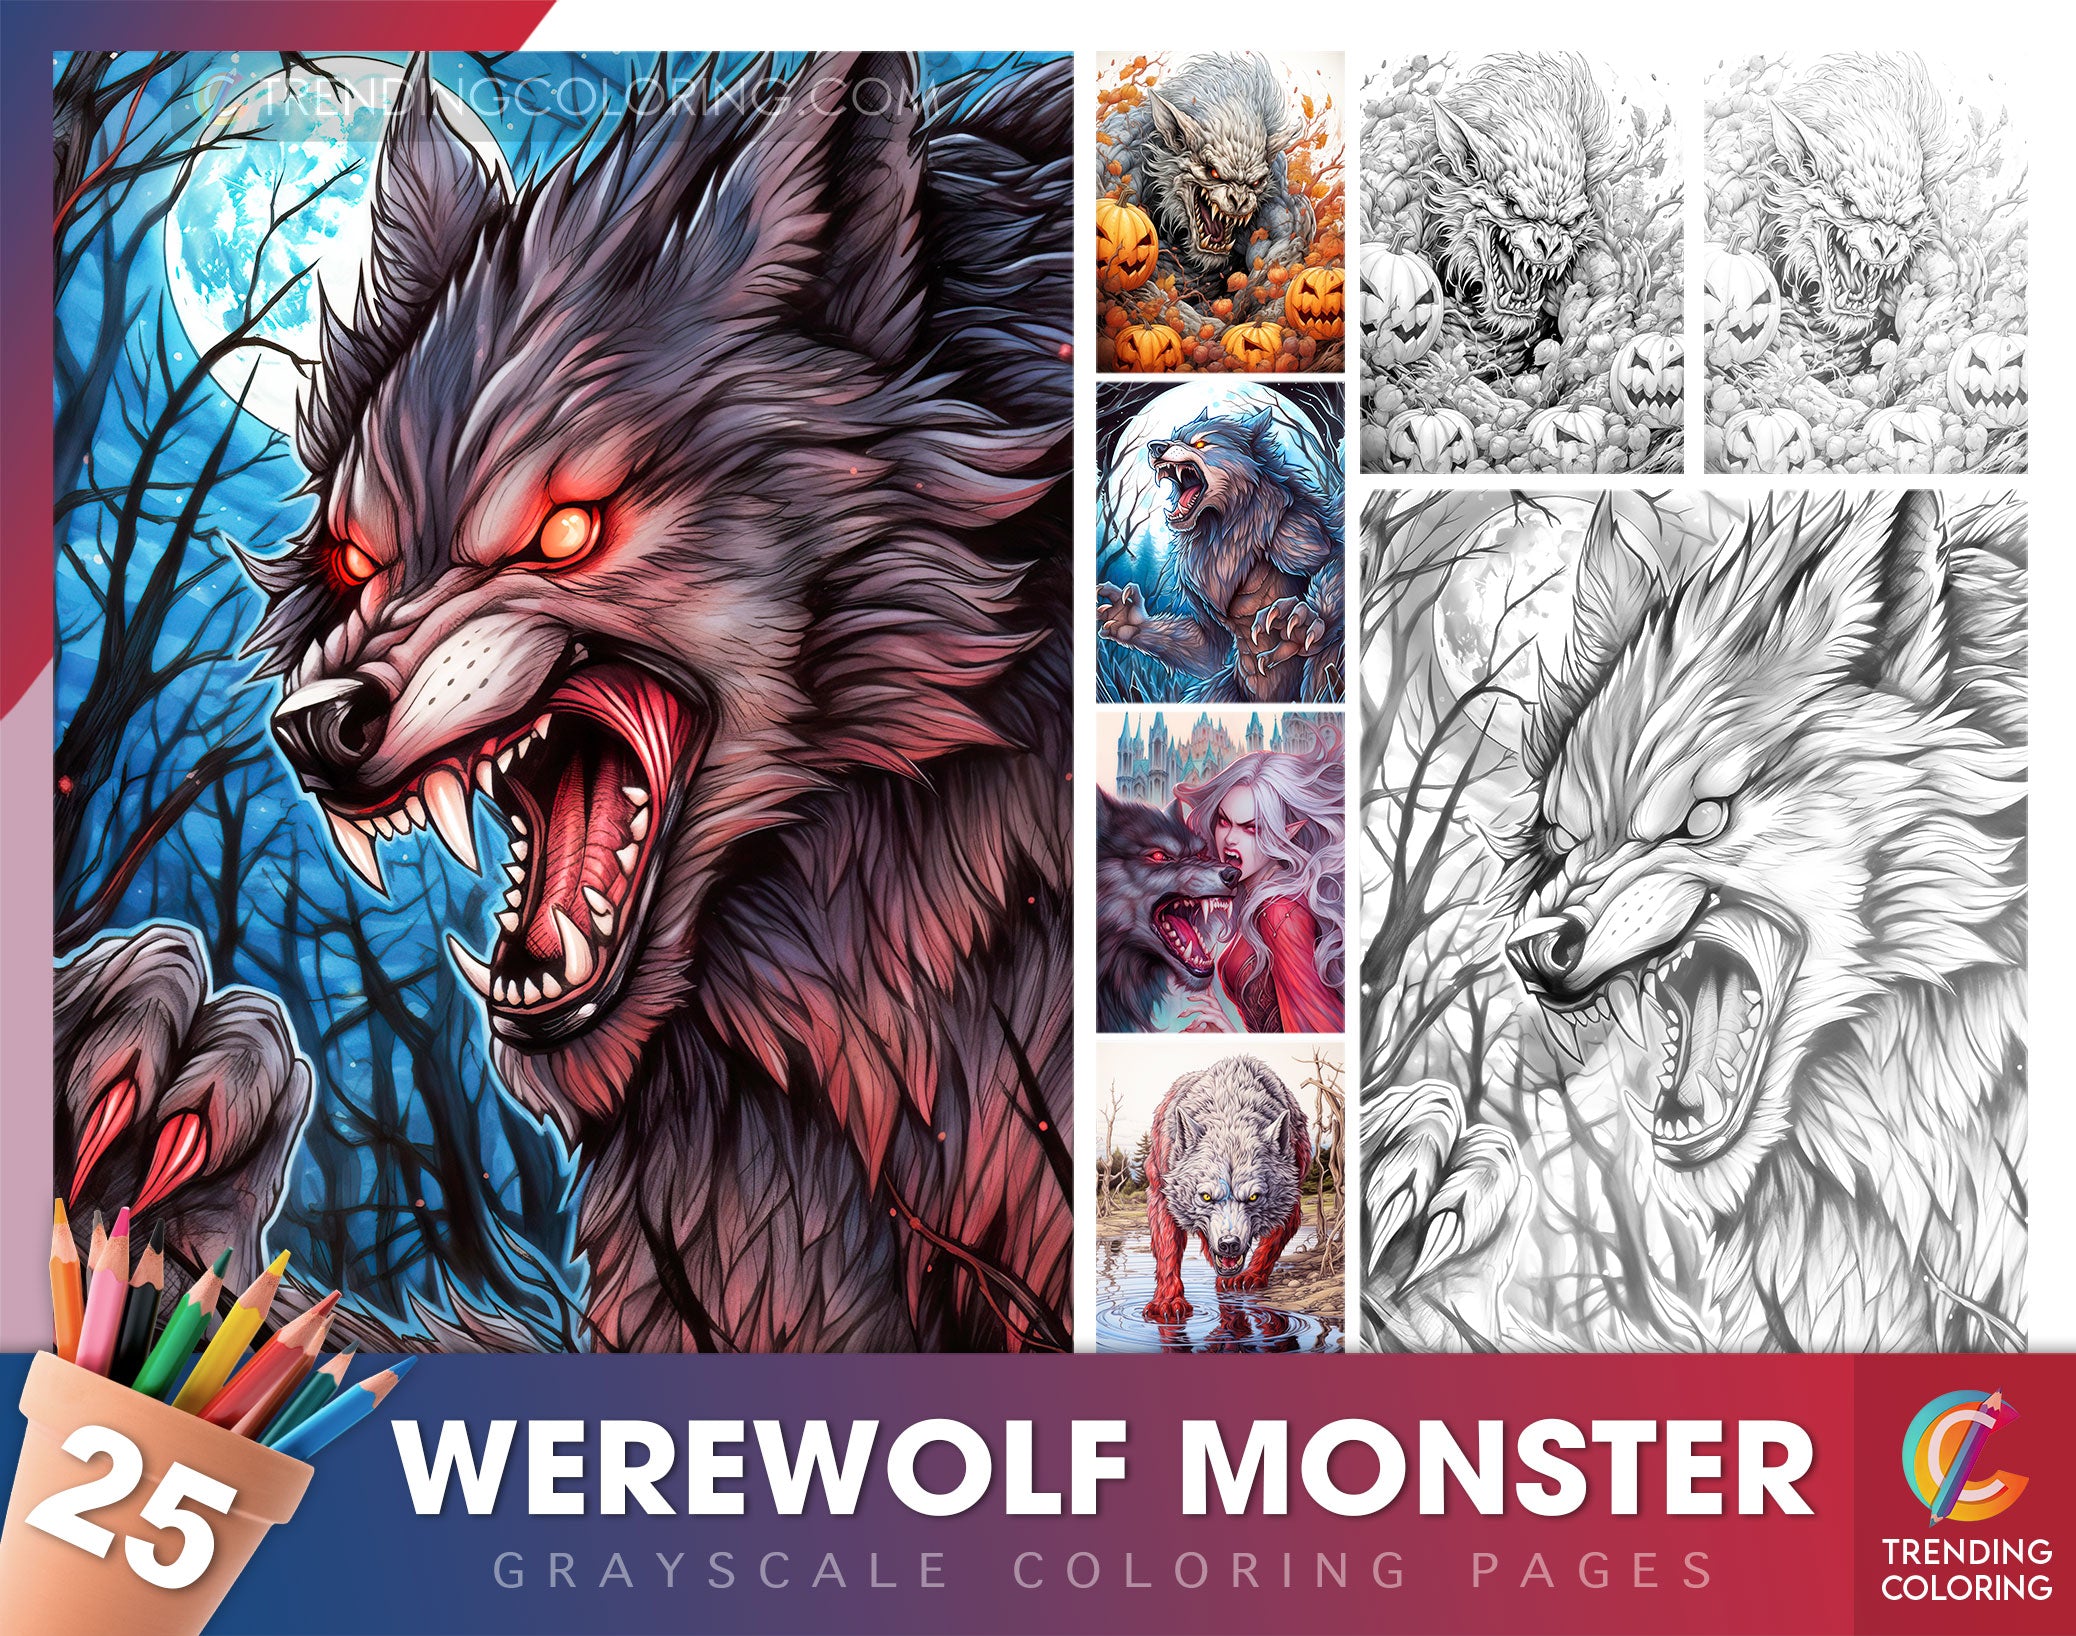 Werewolf monster grayscale coloring pages